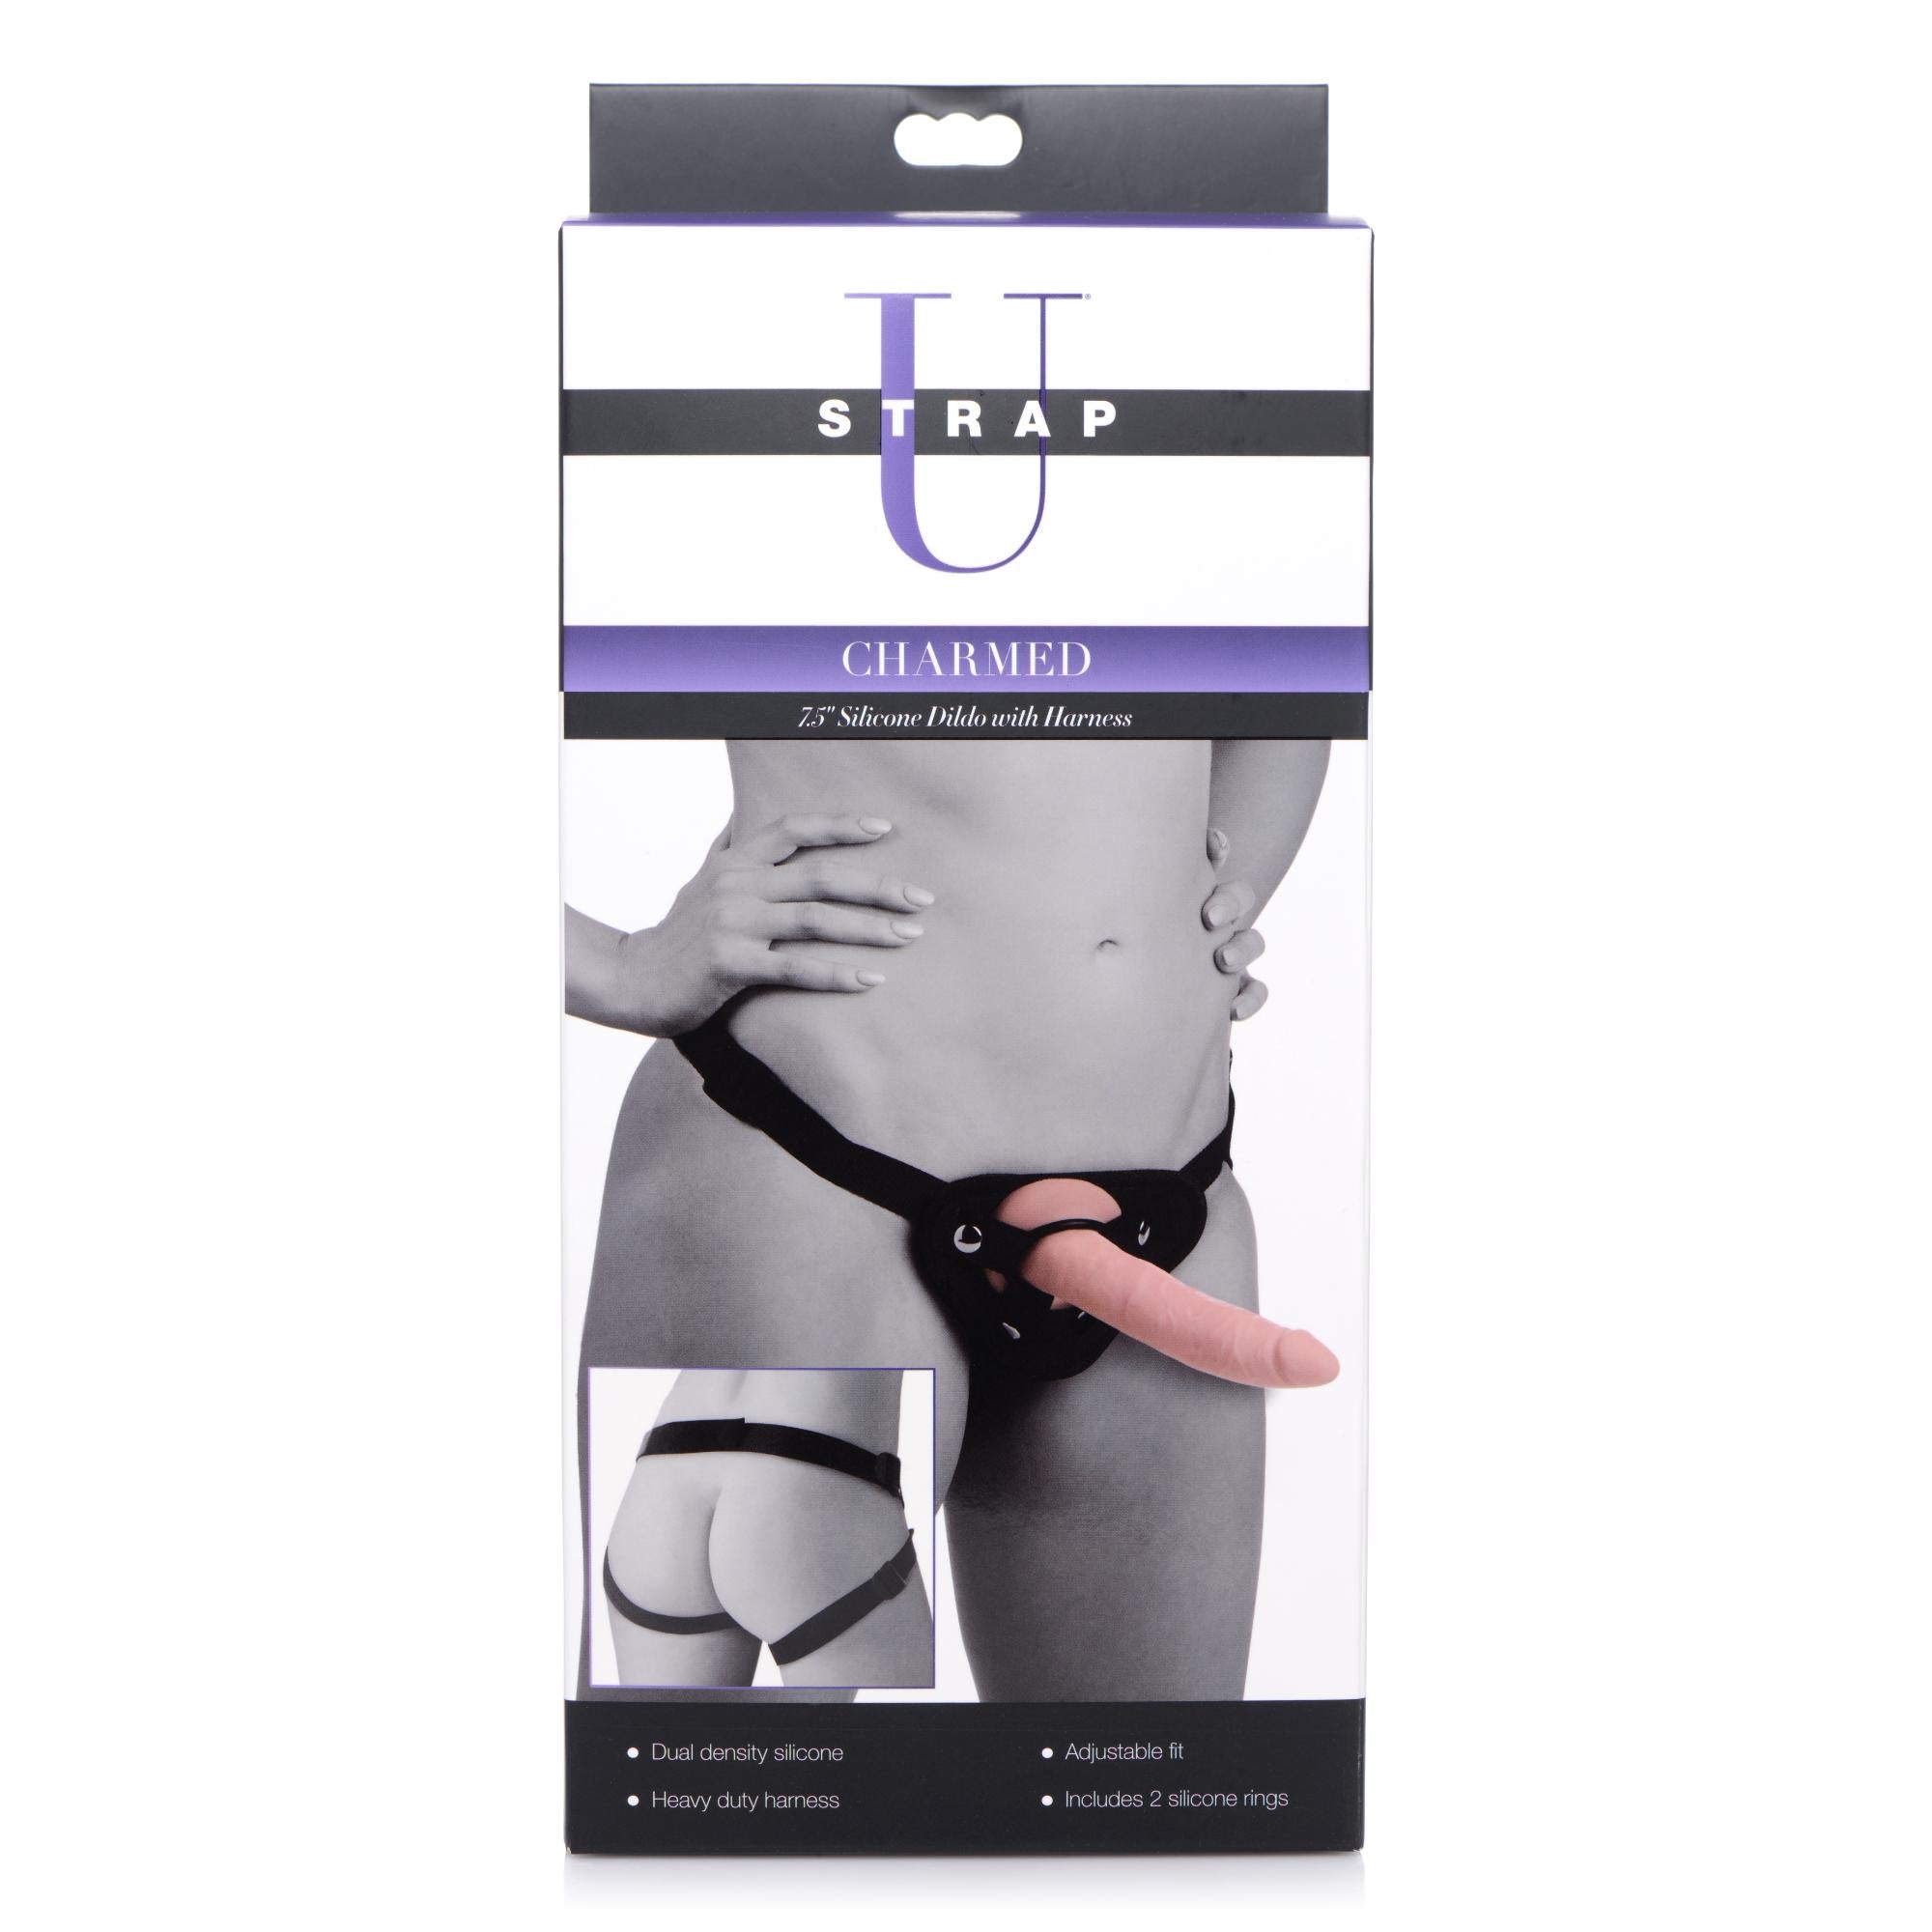 Strap U Charmed 7.5" Silicone Dildo with Harness